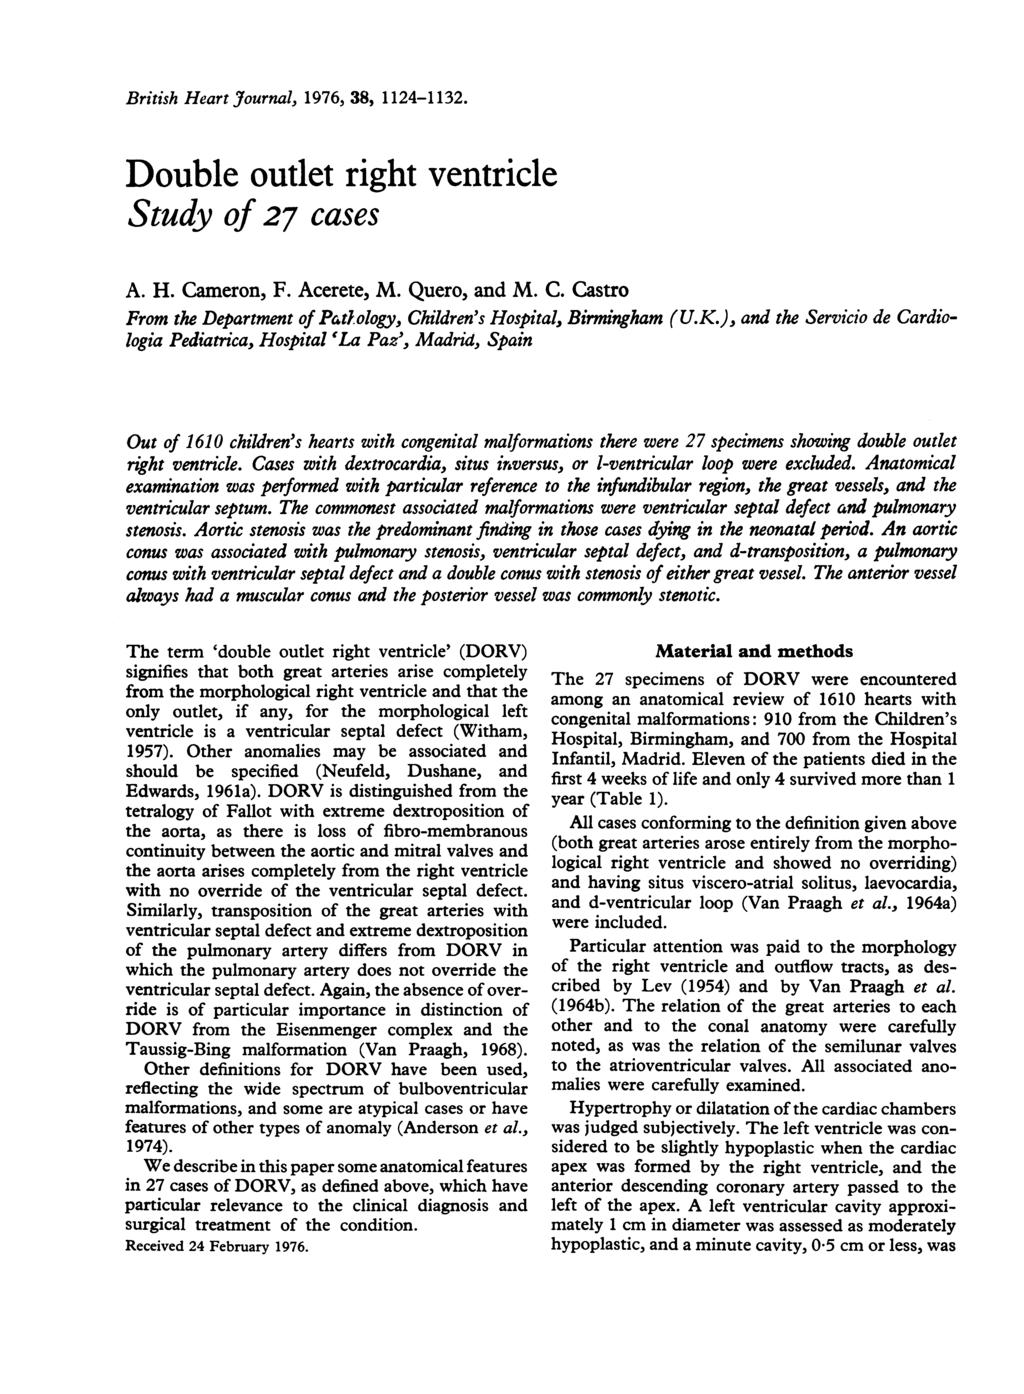 British Heart J7ournal, 1976, 38, 1124-1132. Double outlet right ventricle Study of 27 cases A. H. Cameron, F. Acerete, M. Quero, and M. C. Castro From the Department of Patlology, Children's Hospital, Birmingham (U.